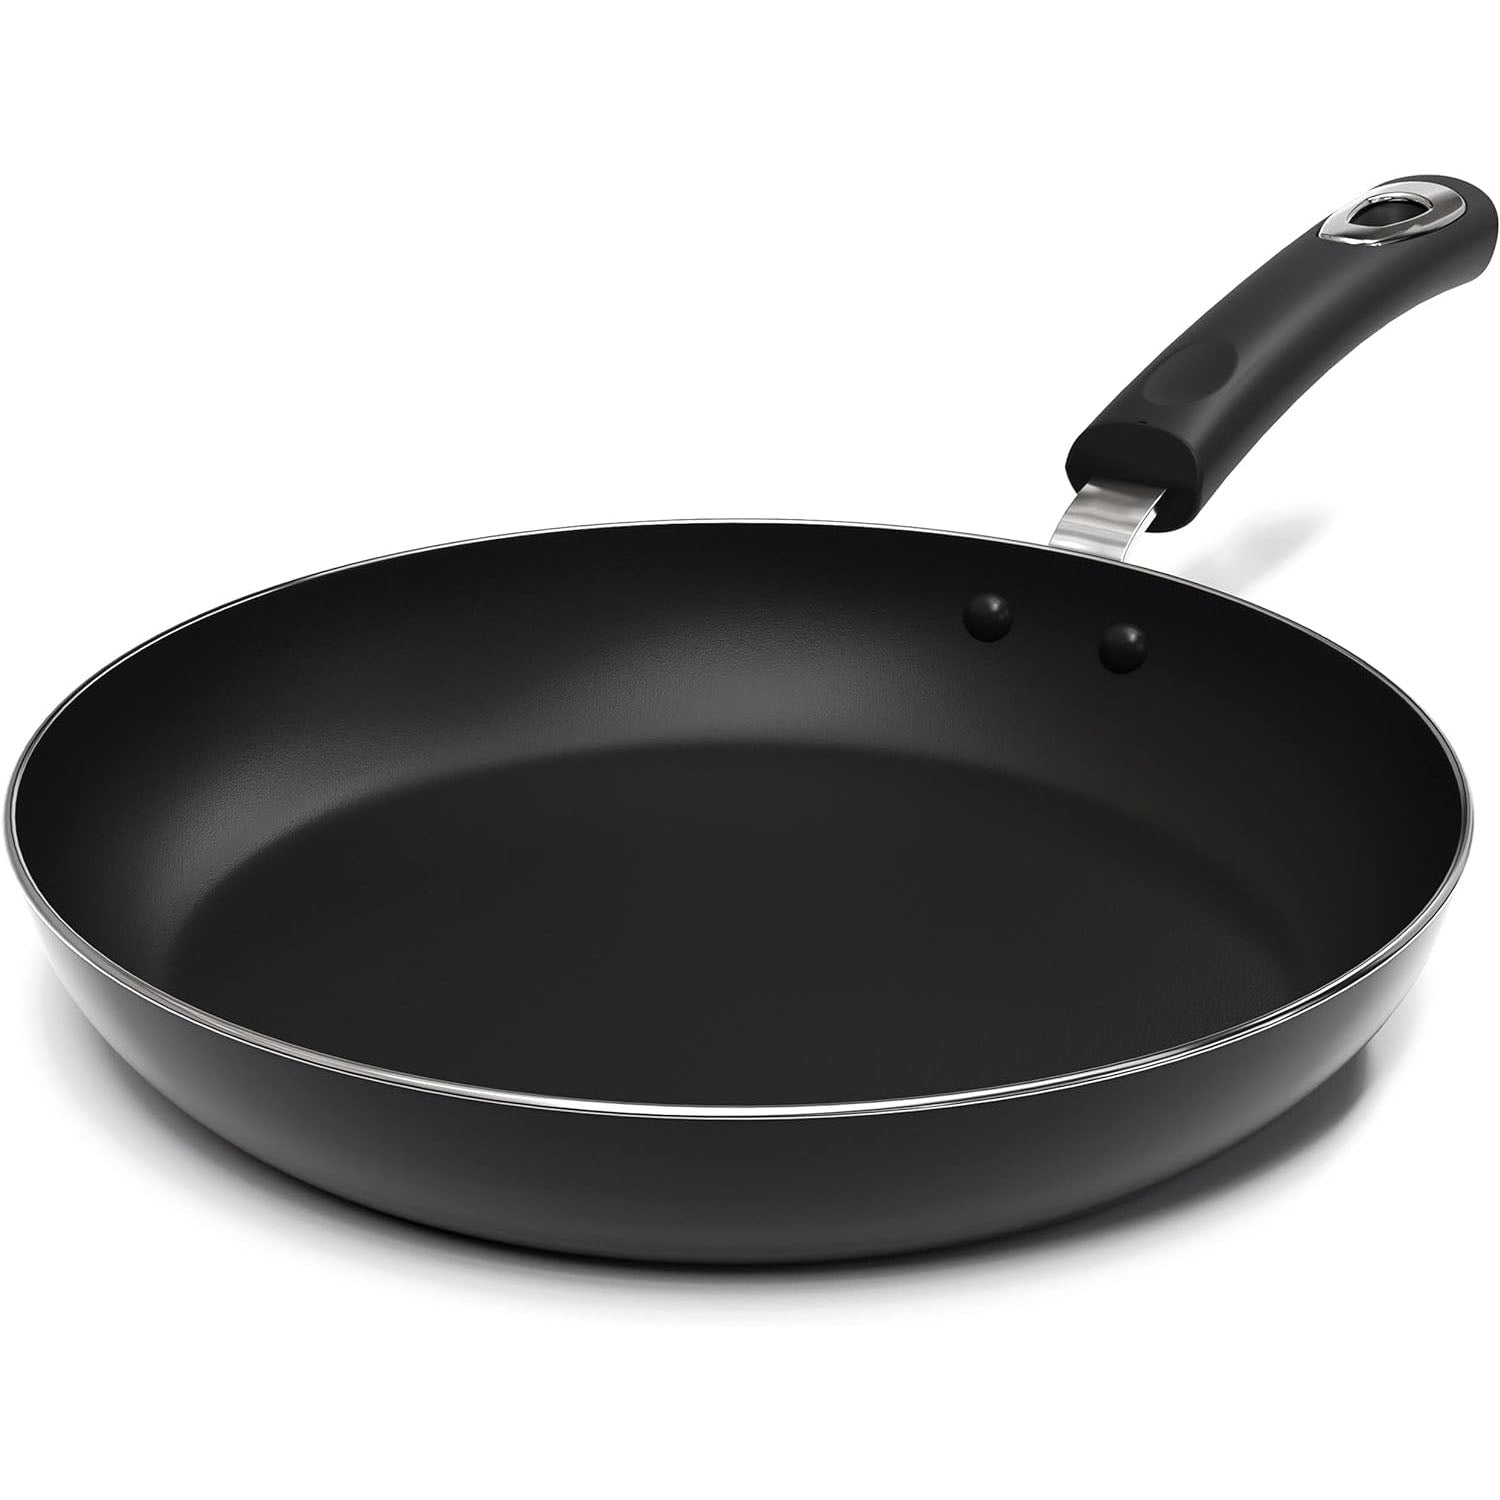 Utopia Kitchen Saute Fry Pan - Nonstick Frying Pan - 8 Inch Induction  Bottom - Aluminum Alloy and Scratch Resistant Body - Riveted Handle (Grey)